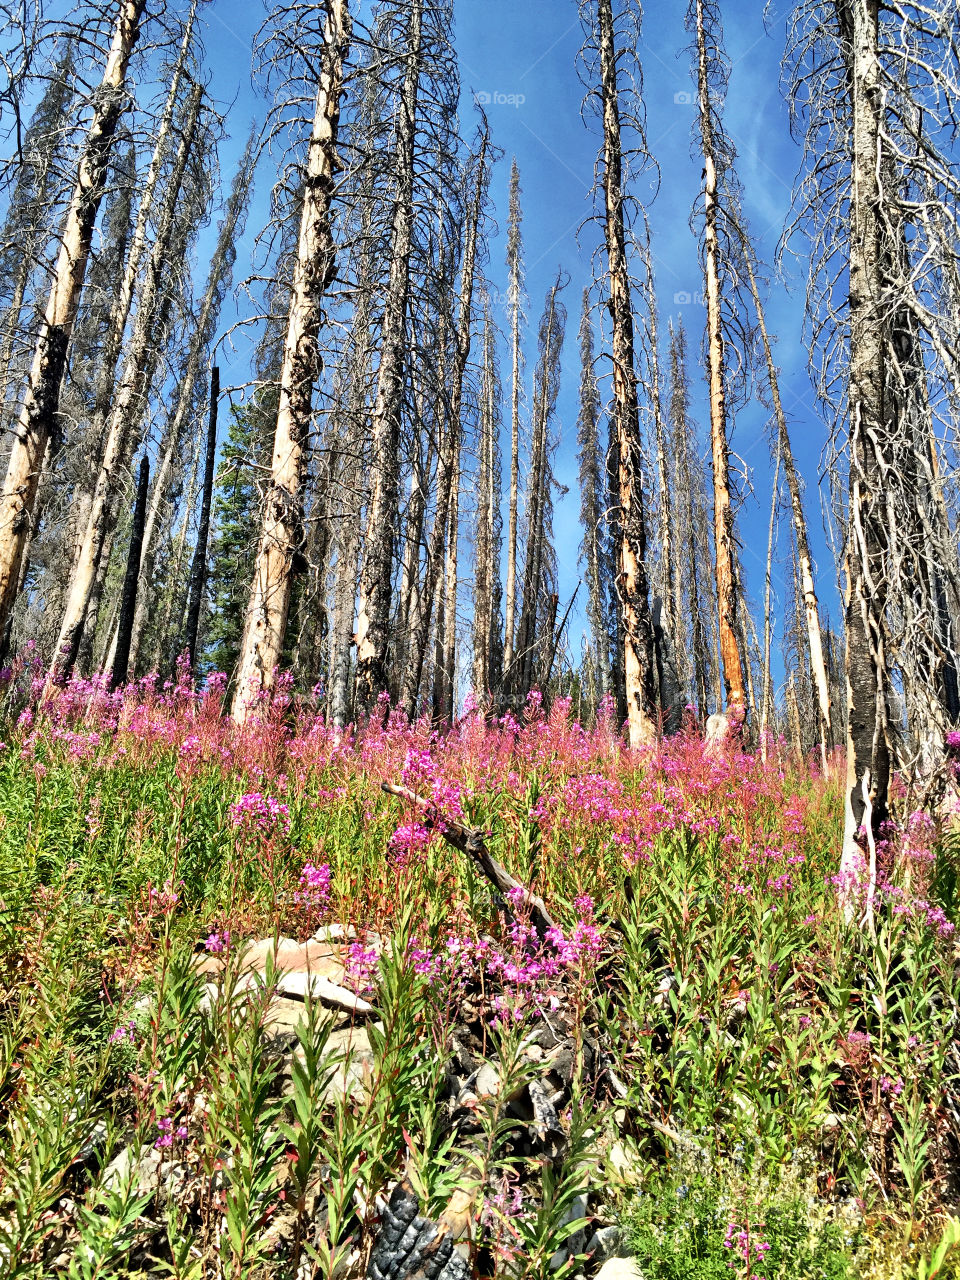 View of fireweed flower in forest